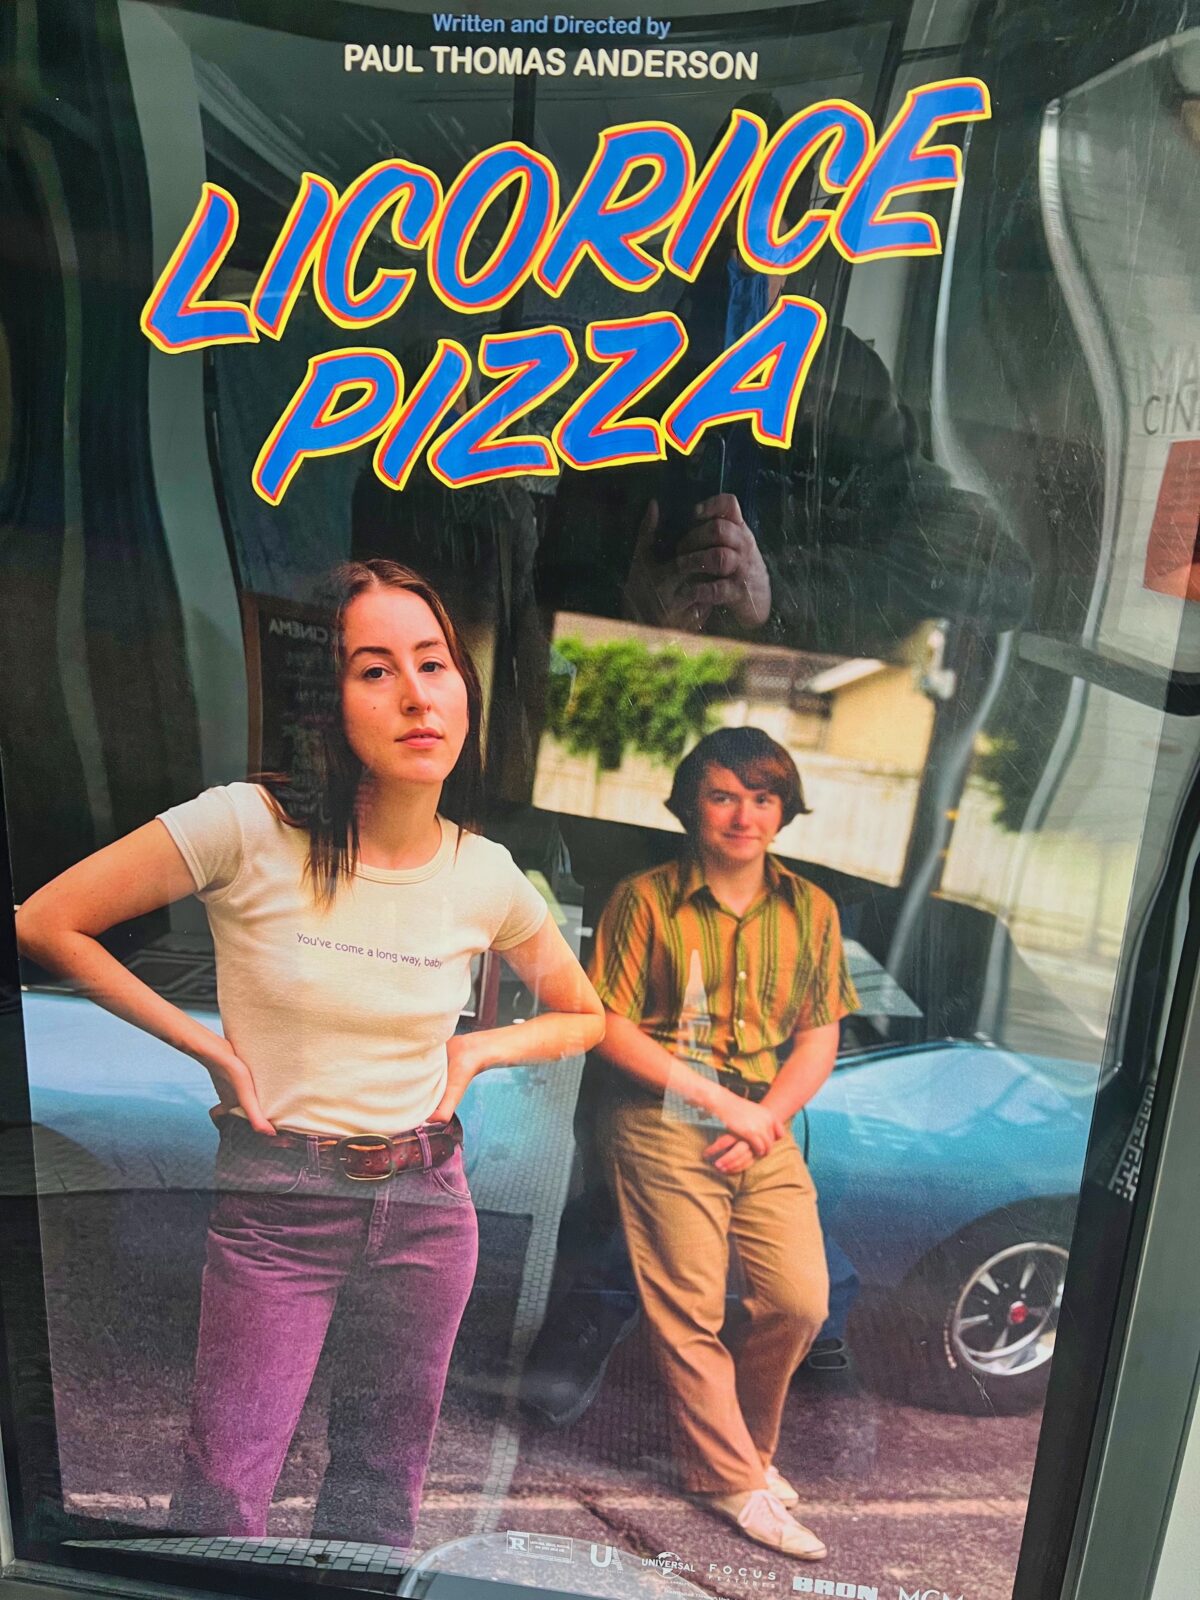 movie review of licorice pizza